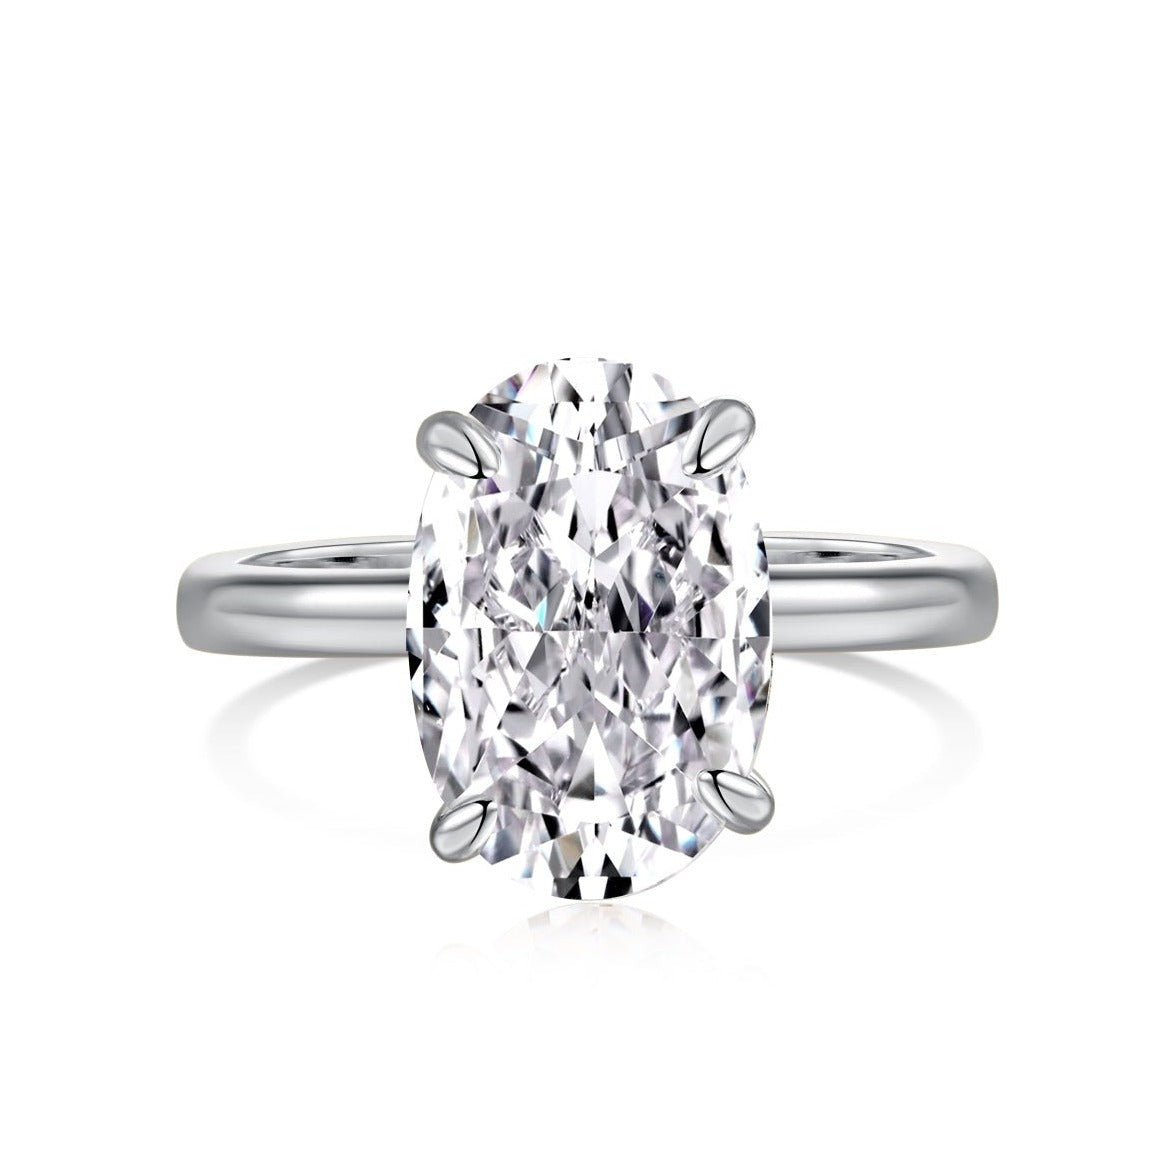 OCEANA SOLITAIRE OVAL CUT DIAMOND ENGAGEMENT RING - Luxora London